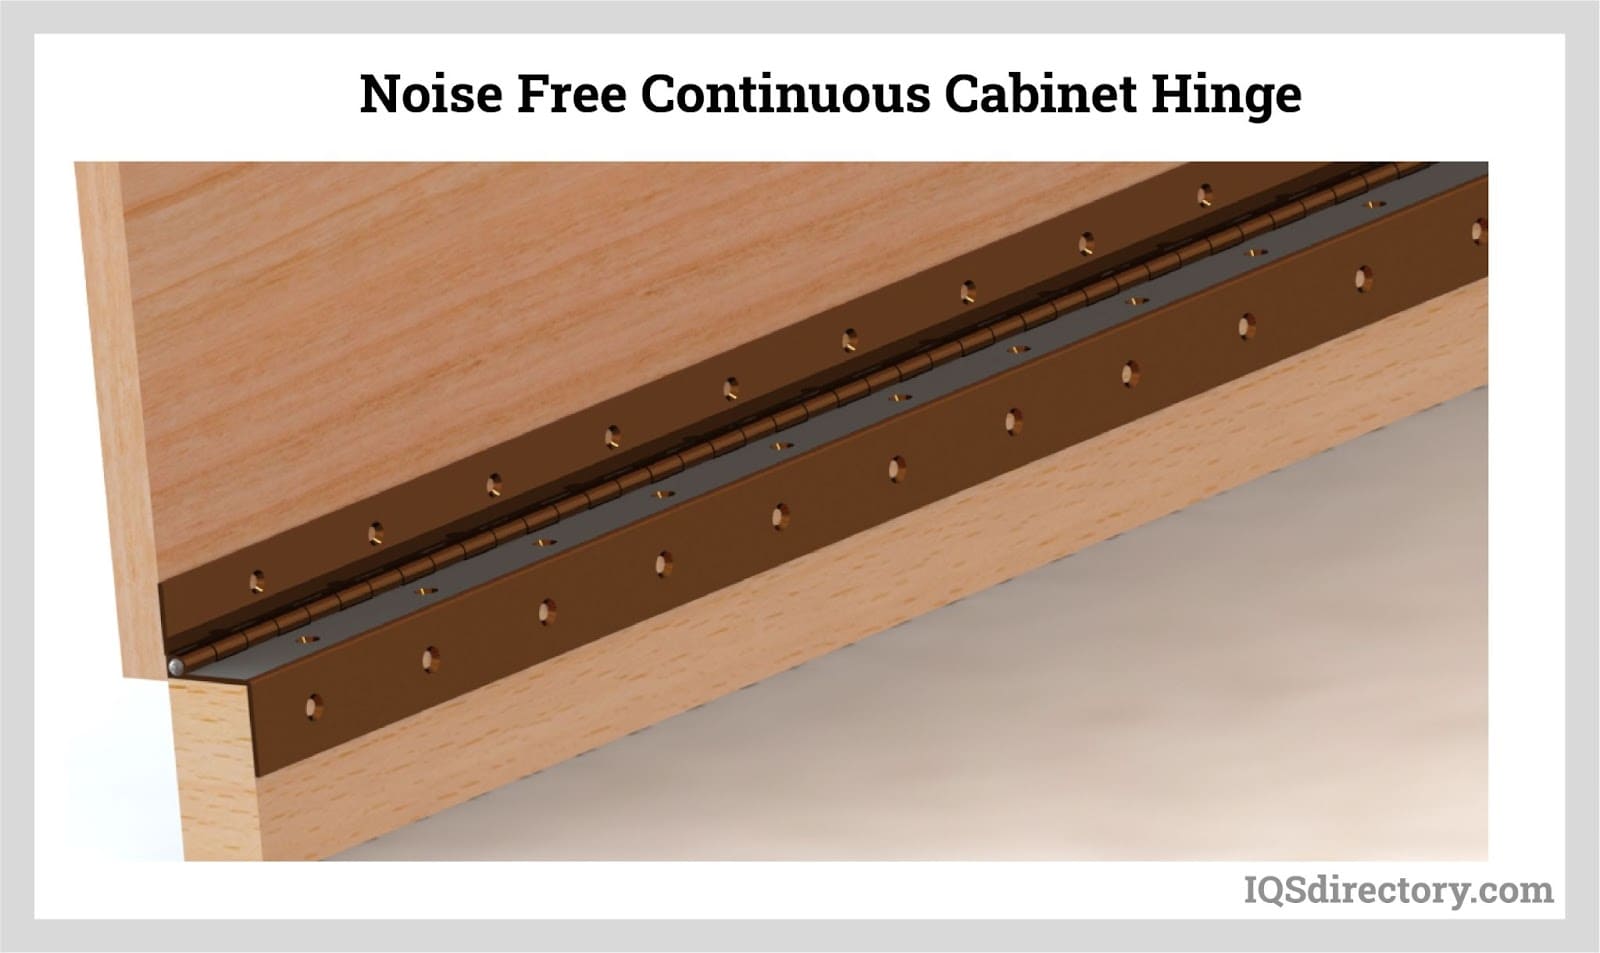 Noise Free Continuous Cabinet Hinge